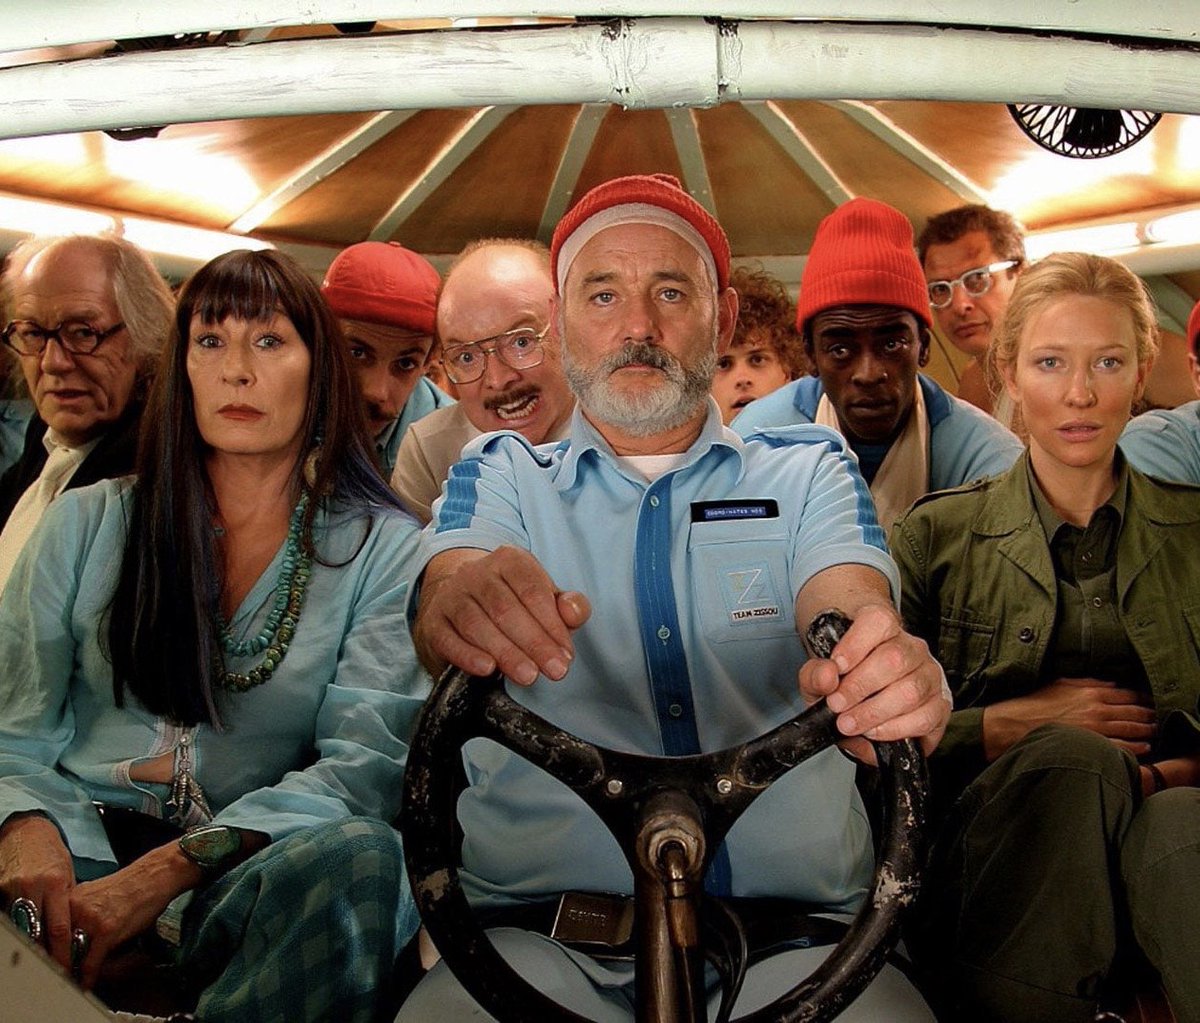 “O, too much folly is it, well I wot, to hazard all our lives in one small boat!” ~ Henry VI Pt 1 (A4,S6).
#ShakespeareSunday #WesAnderson #FlicksOfMyYears